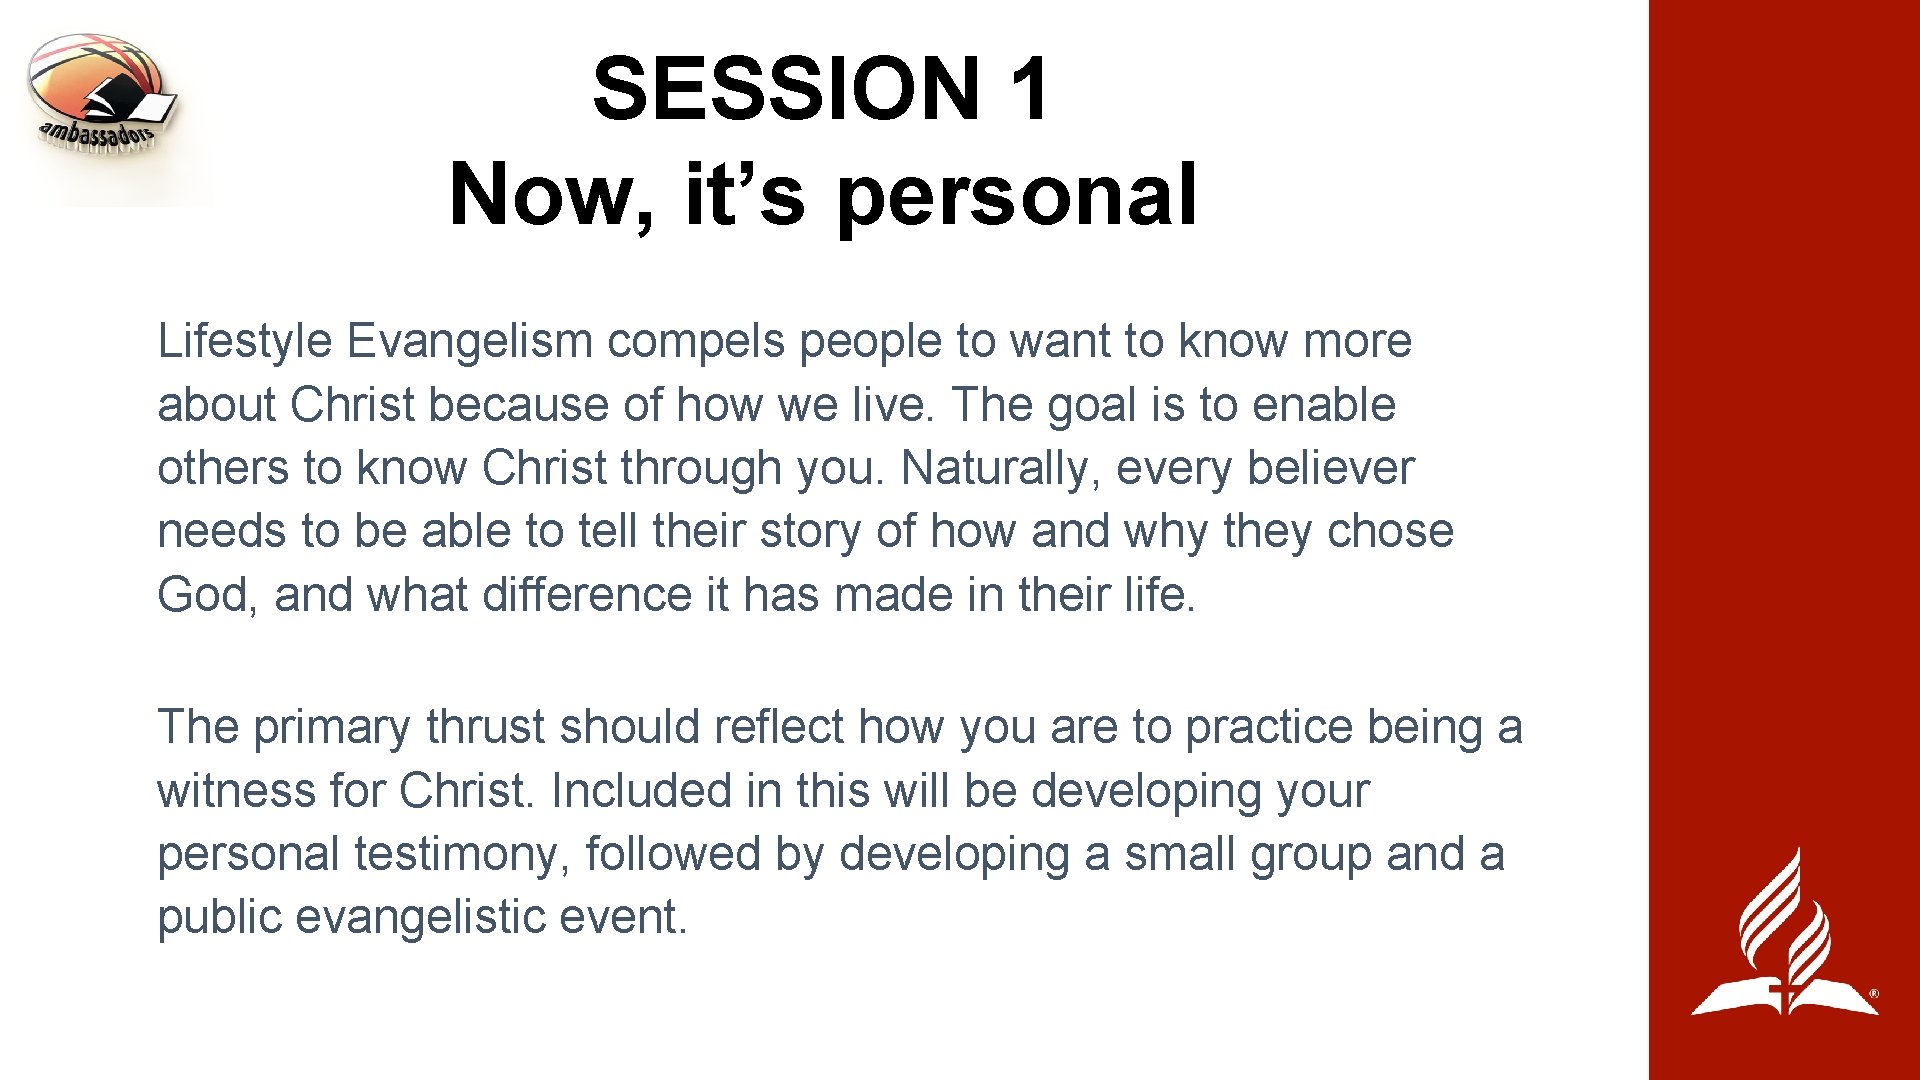 SESSION 1 Now, it’s personal Lifestyle Evangelism compels people to want to know more